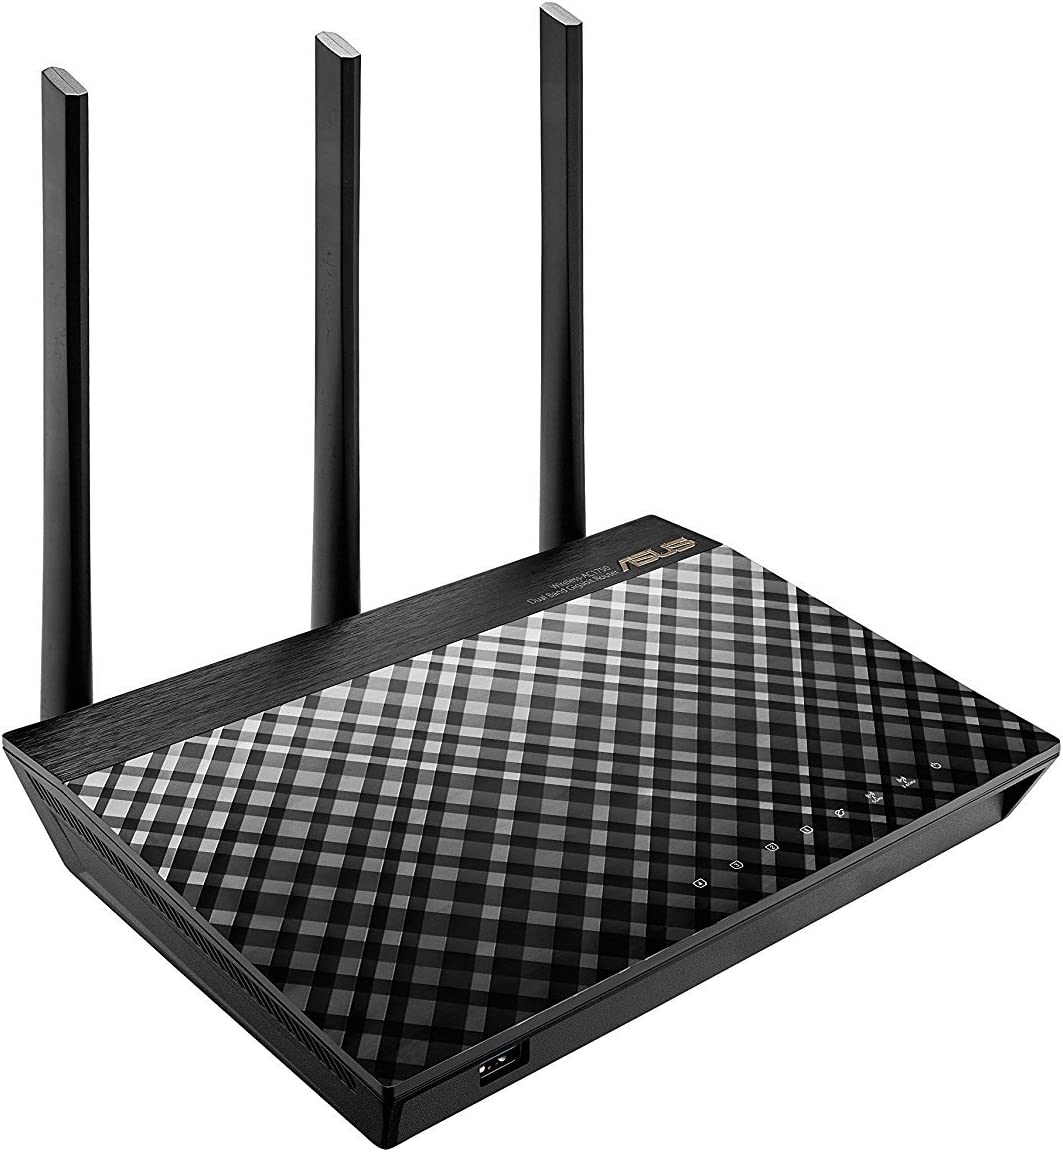 Asus Rt-ac66u B1 Ieee 802.11ac Ethernet Wireless Router - 2.40 Ghz Ism Band - 5 Ghz Unii Band(3 X E